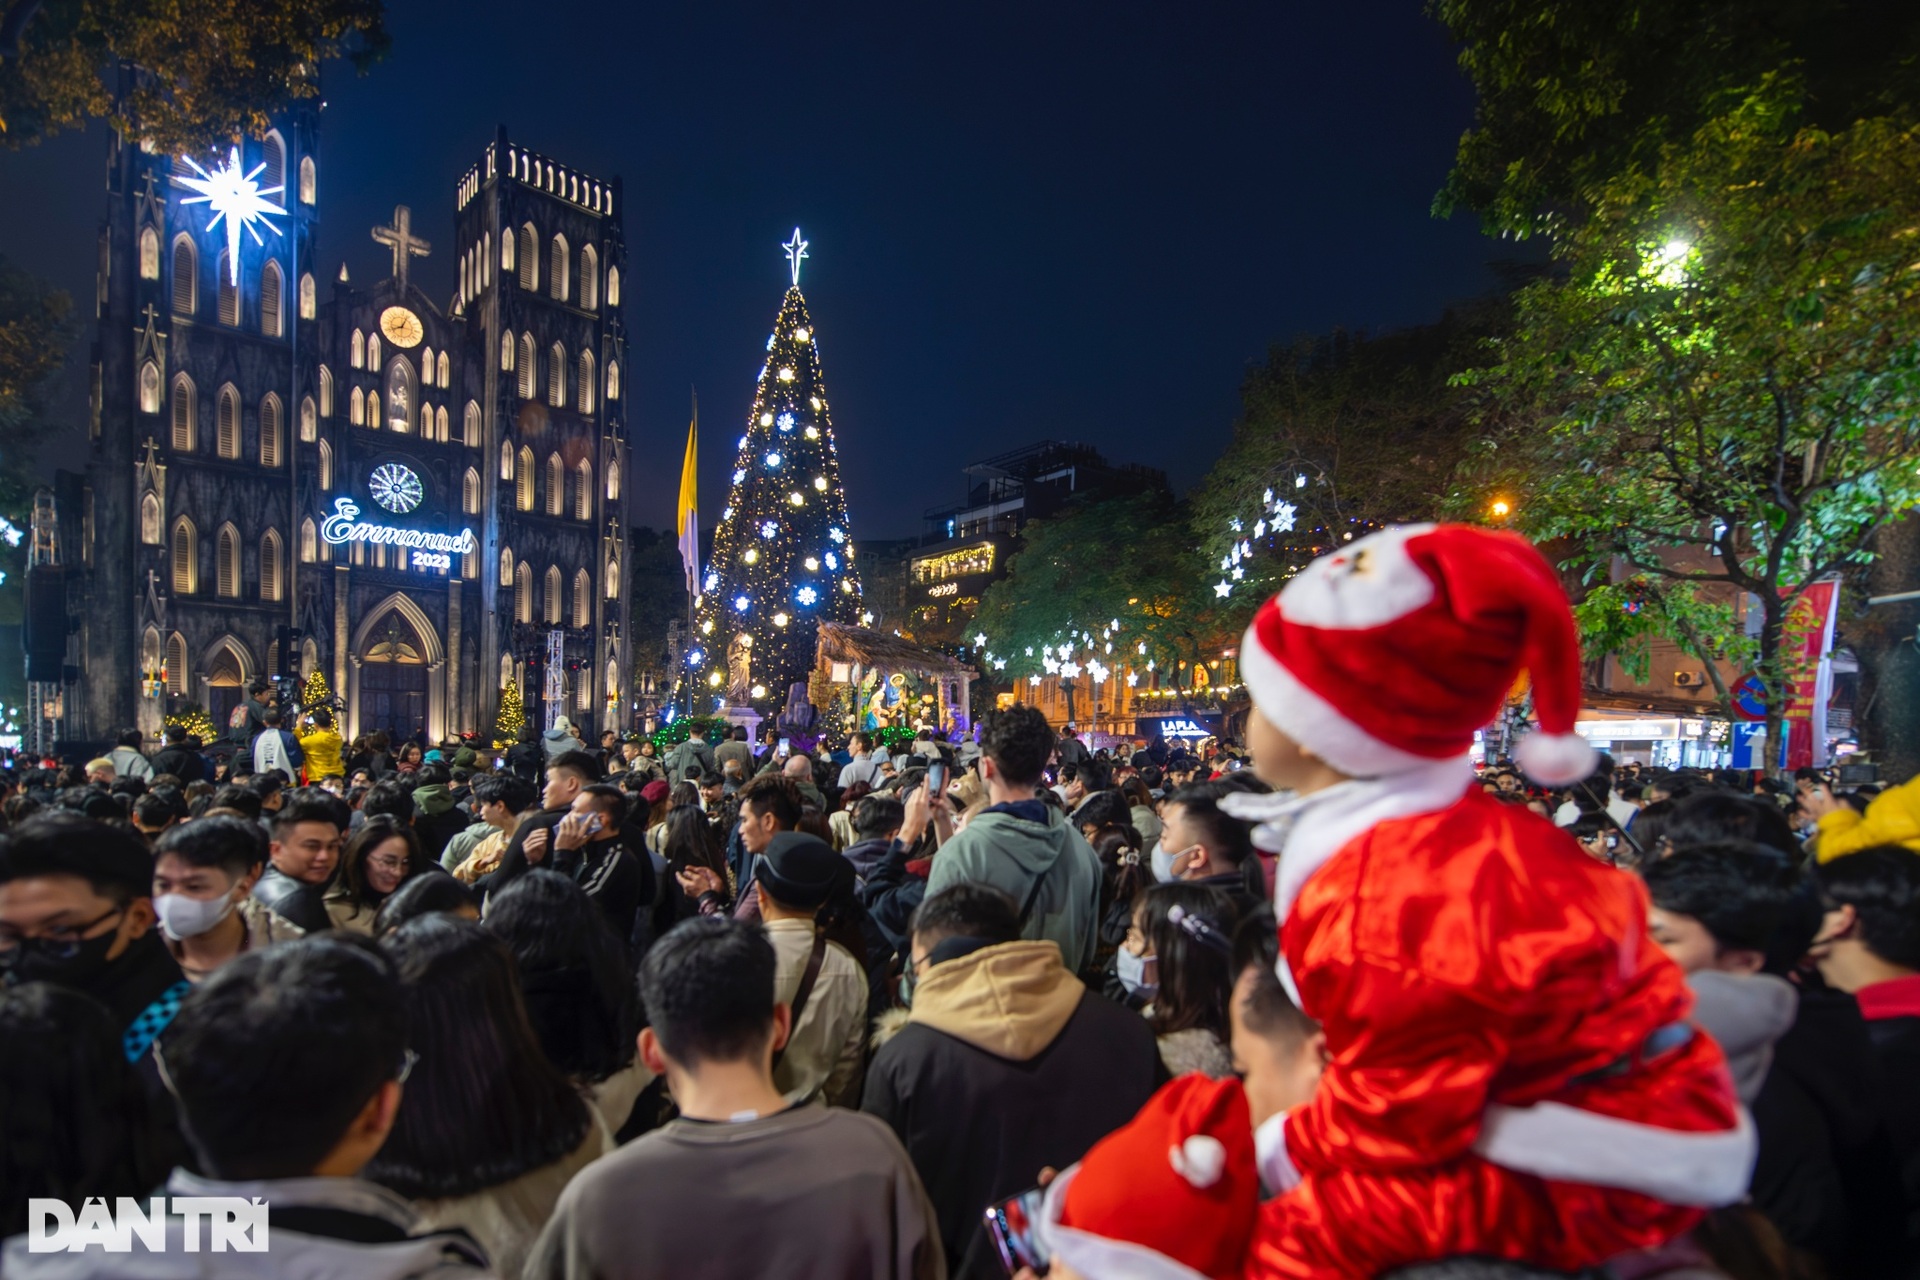 Hanoi is 10 degrees Celsius cold, young people still flock to the Cathedral on Christmas Eve - November